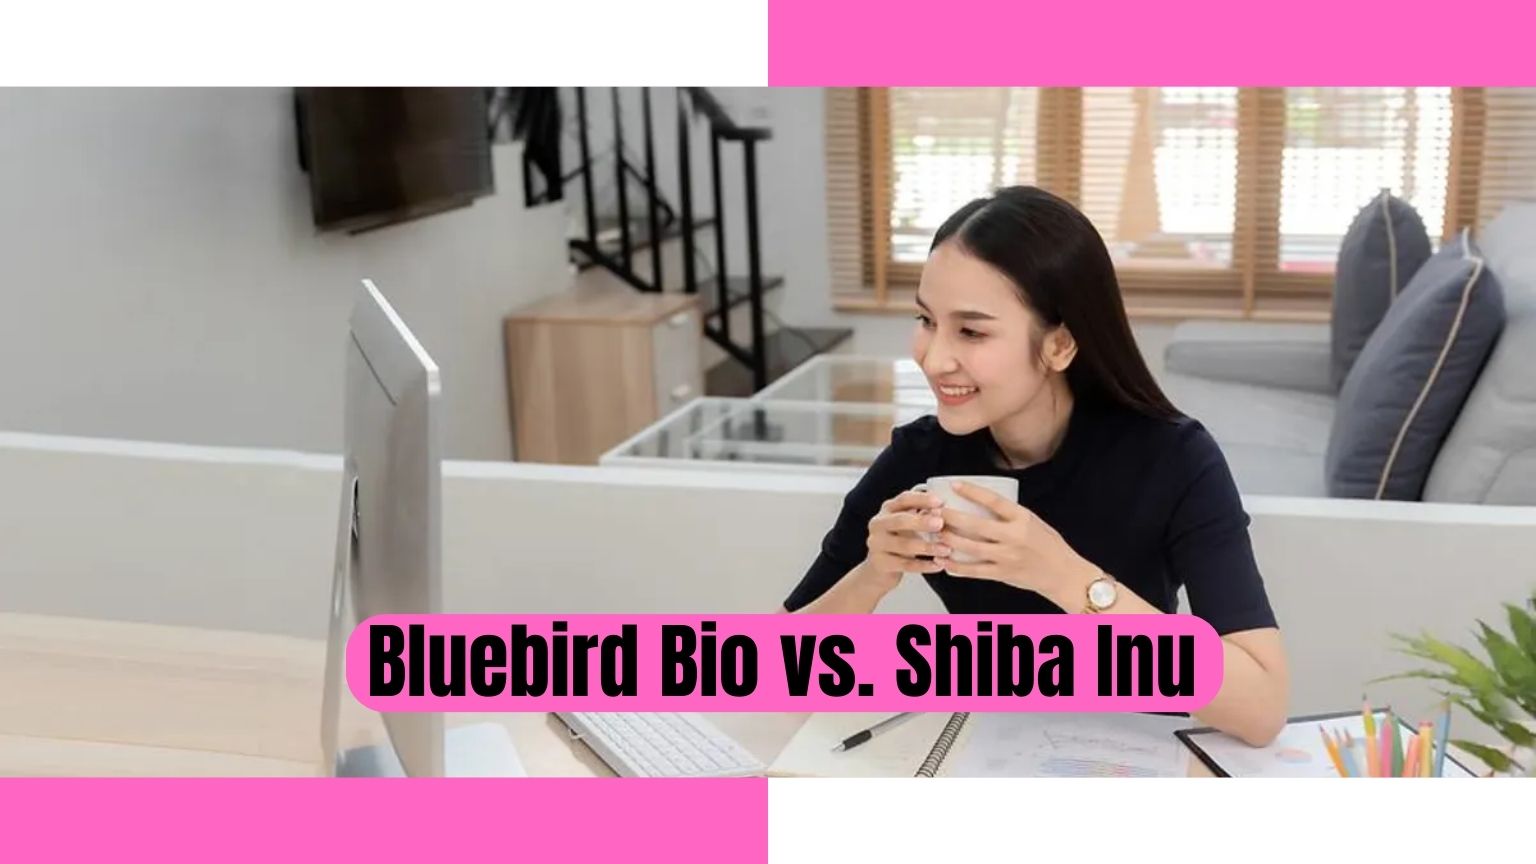 shiba inu coin, shiba inu, shiba inu price, shiba inu coin price, shiba inu coin cryptocurrency, shiba inu news, Bluebird Bio, bluebird bio stock, bluebird bio news,Bluebird Bio vs. Shiba Inu - A Closer Look at Two High-Stake Investments